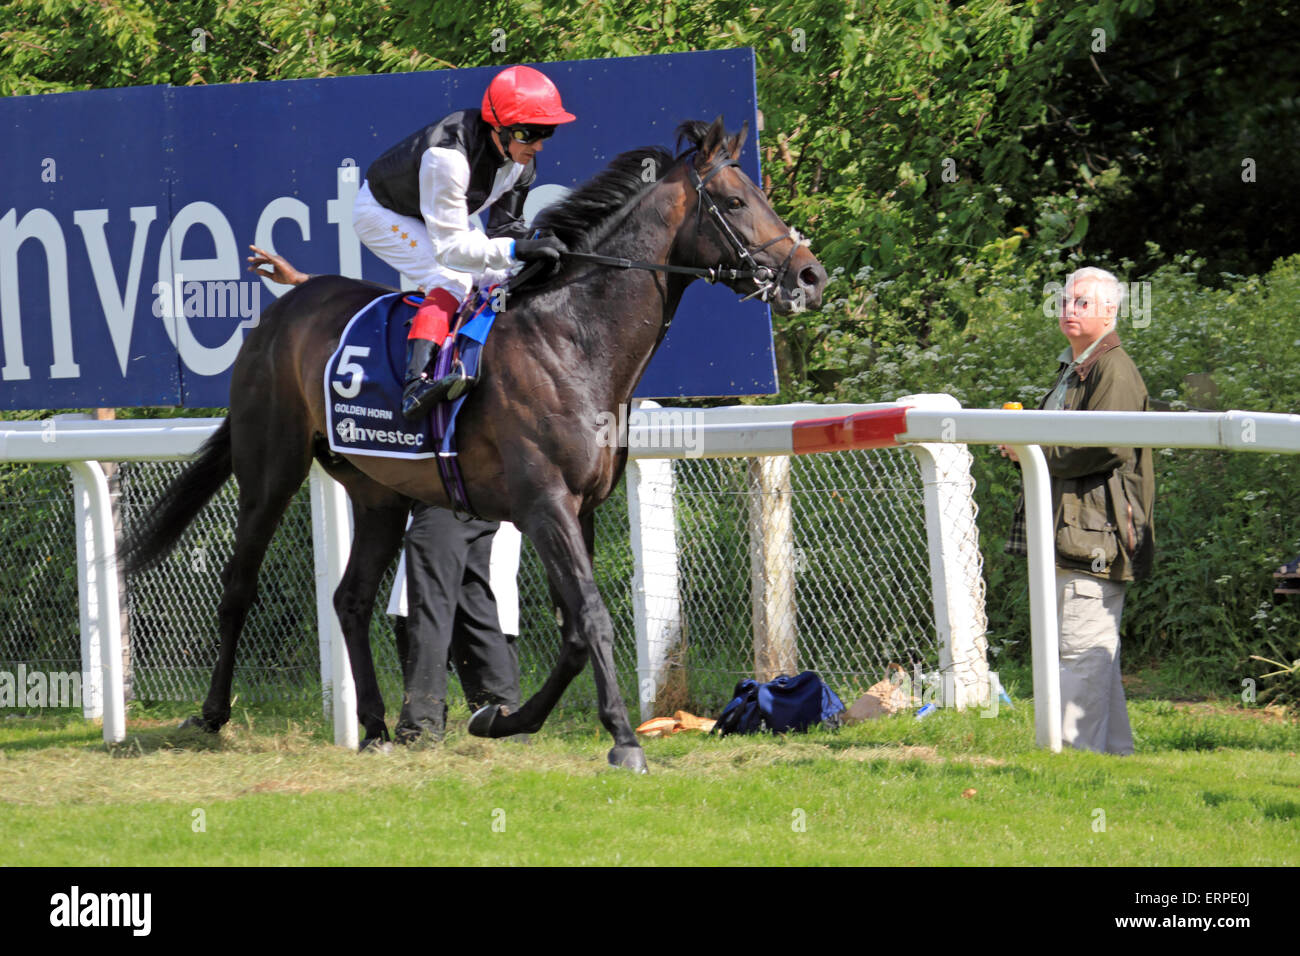 Epsom Downs Surrey UK. 6th June, 2015. No. 5 Golden Horn the pre race favourite and winner, riden by Frankie Dettori heads for the start before the big race the Investec Derby 2015. Stock Photo